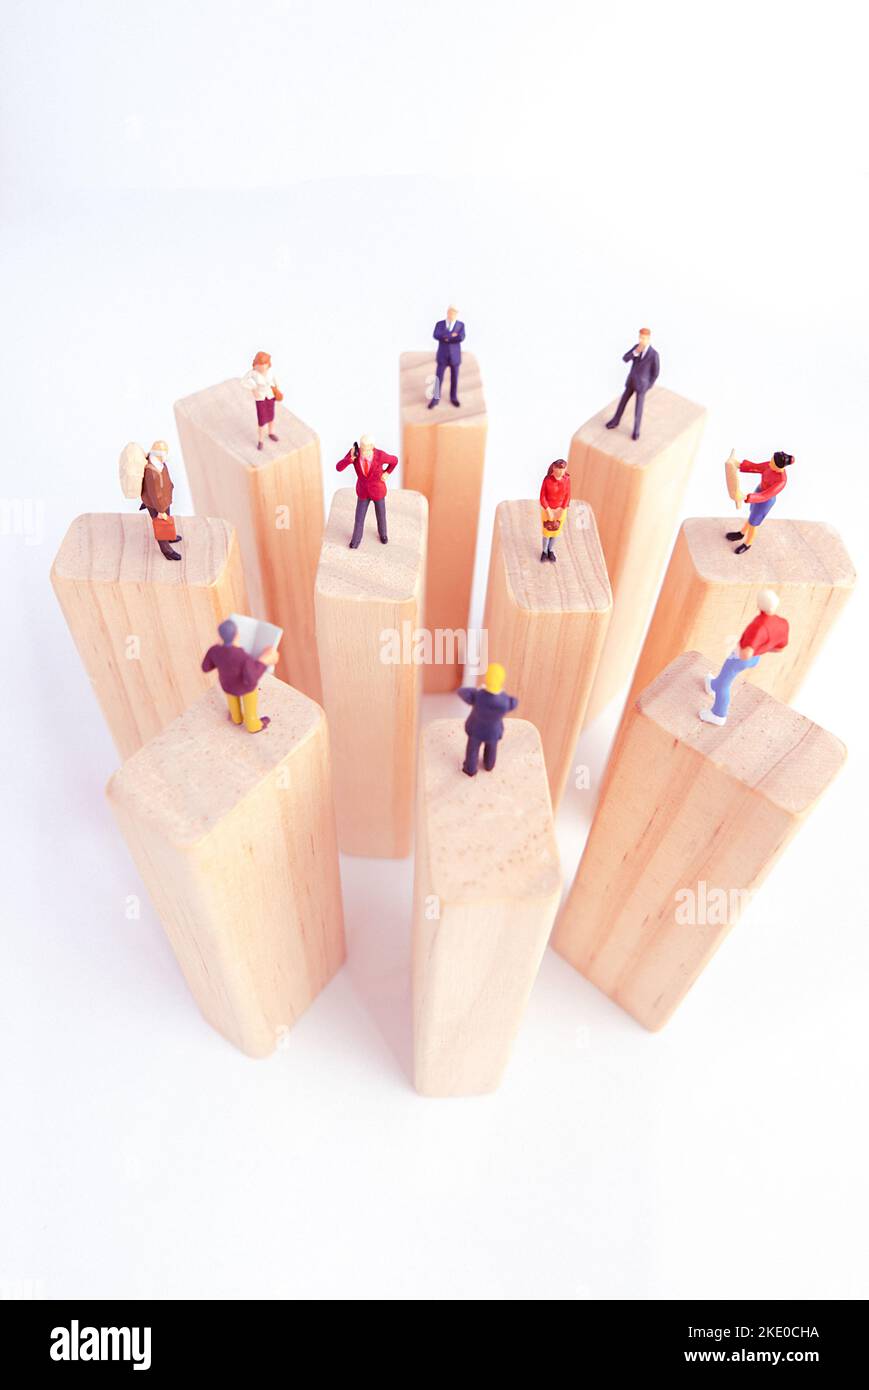 Top view of miniature toys standing on wooden block - social distancing, anti-social or team work concept. Stock Photo